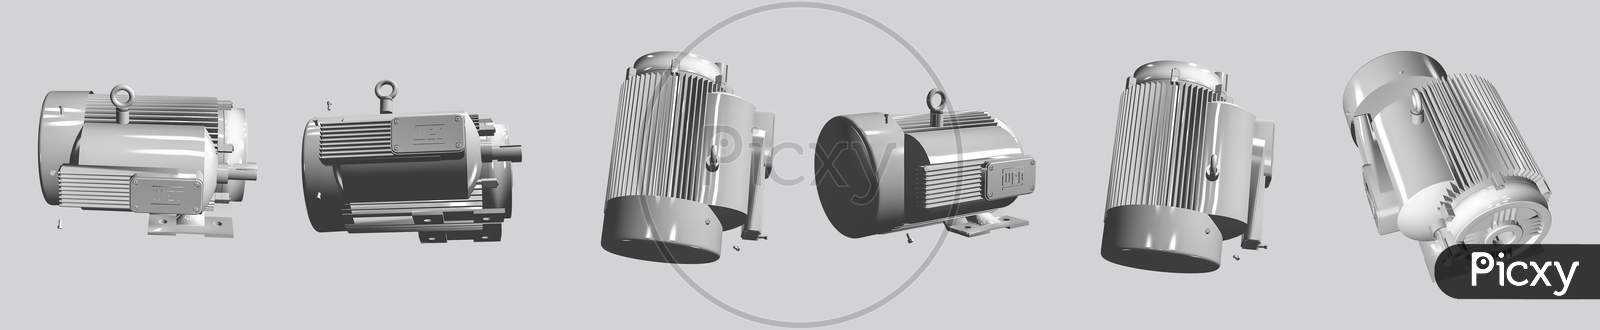 3D Model Set Of Electric Motor View From Different Sides